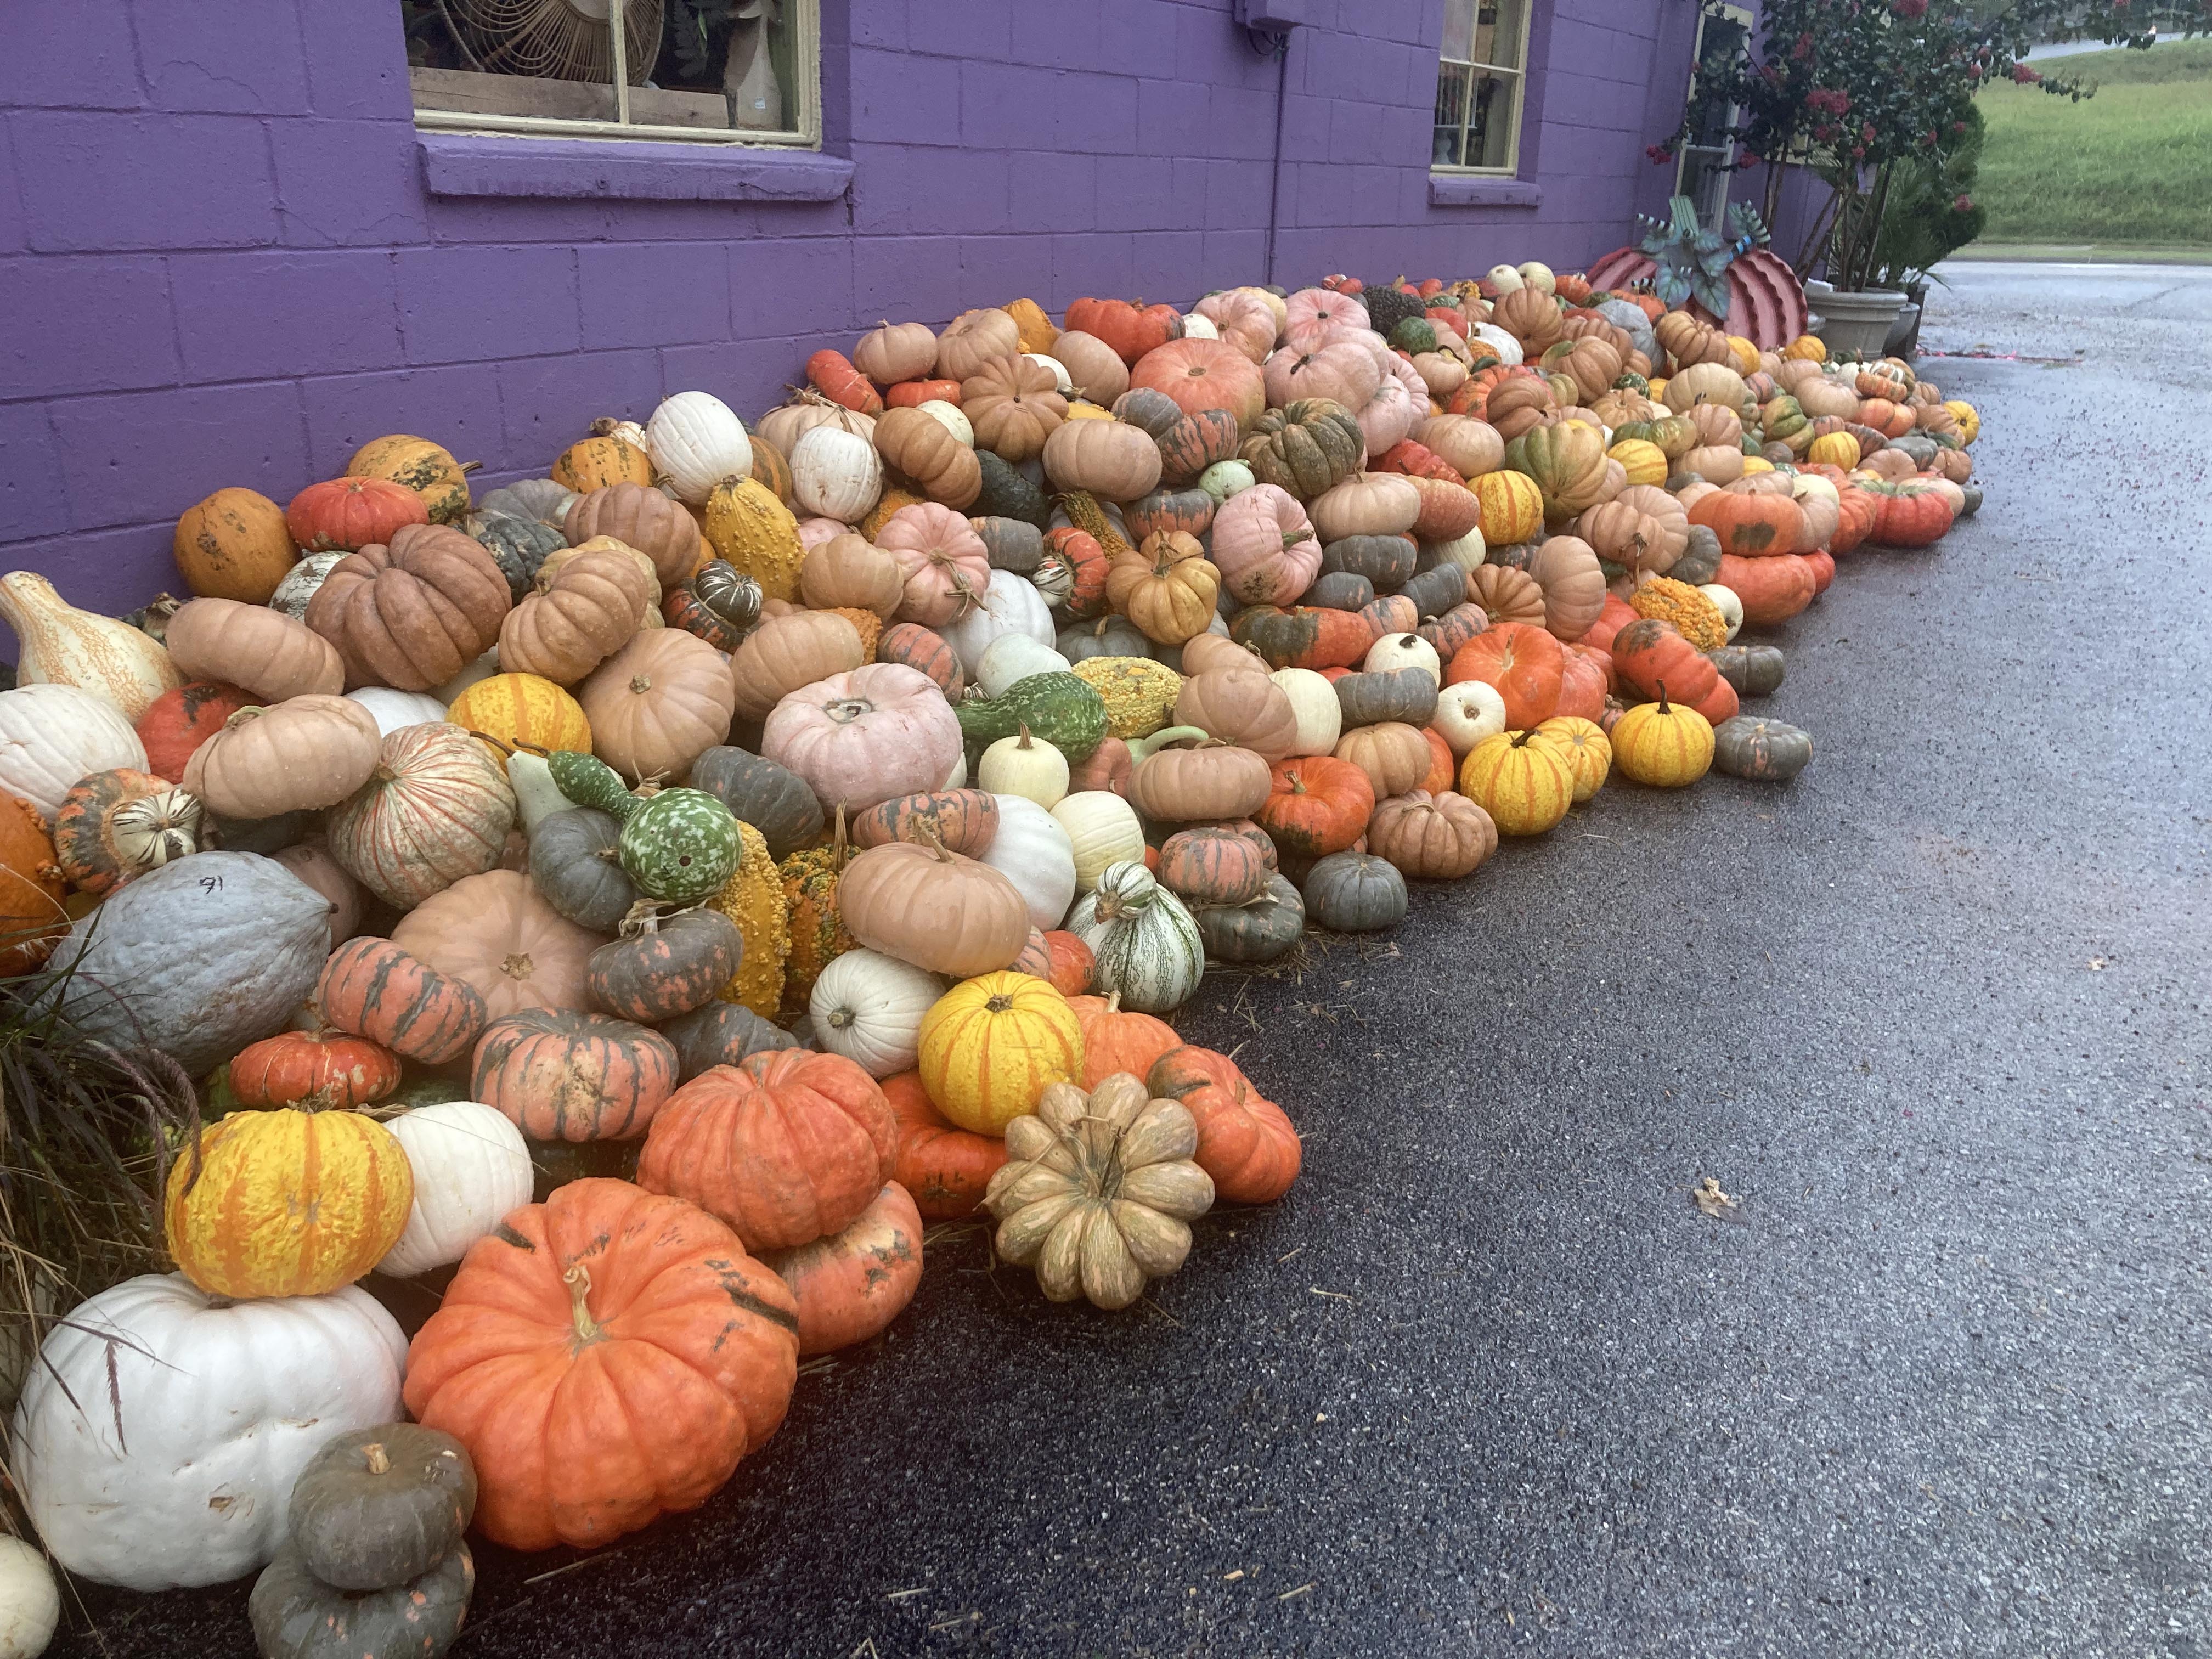 A large pile of gourds against a wall